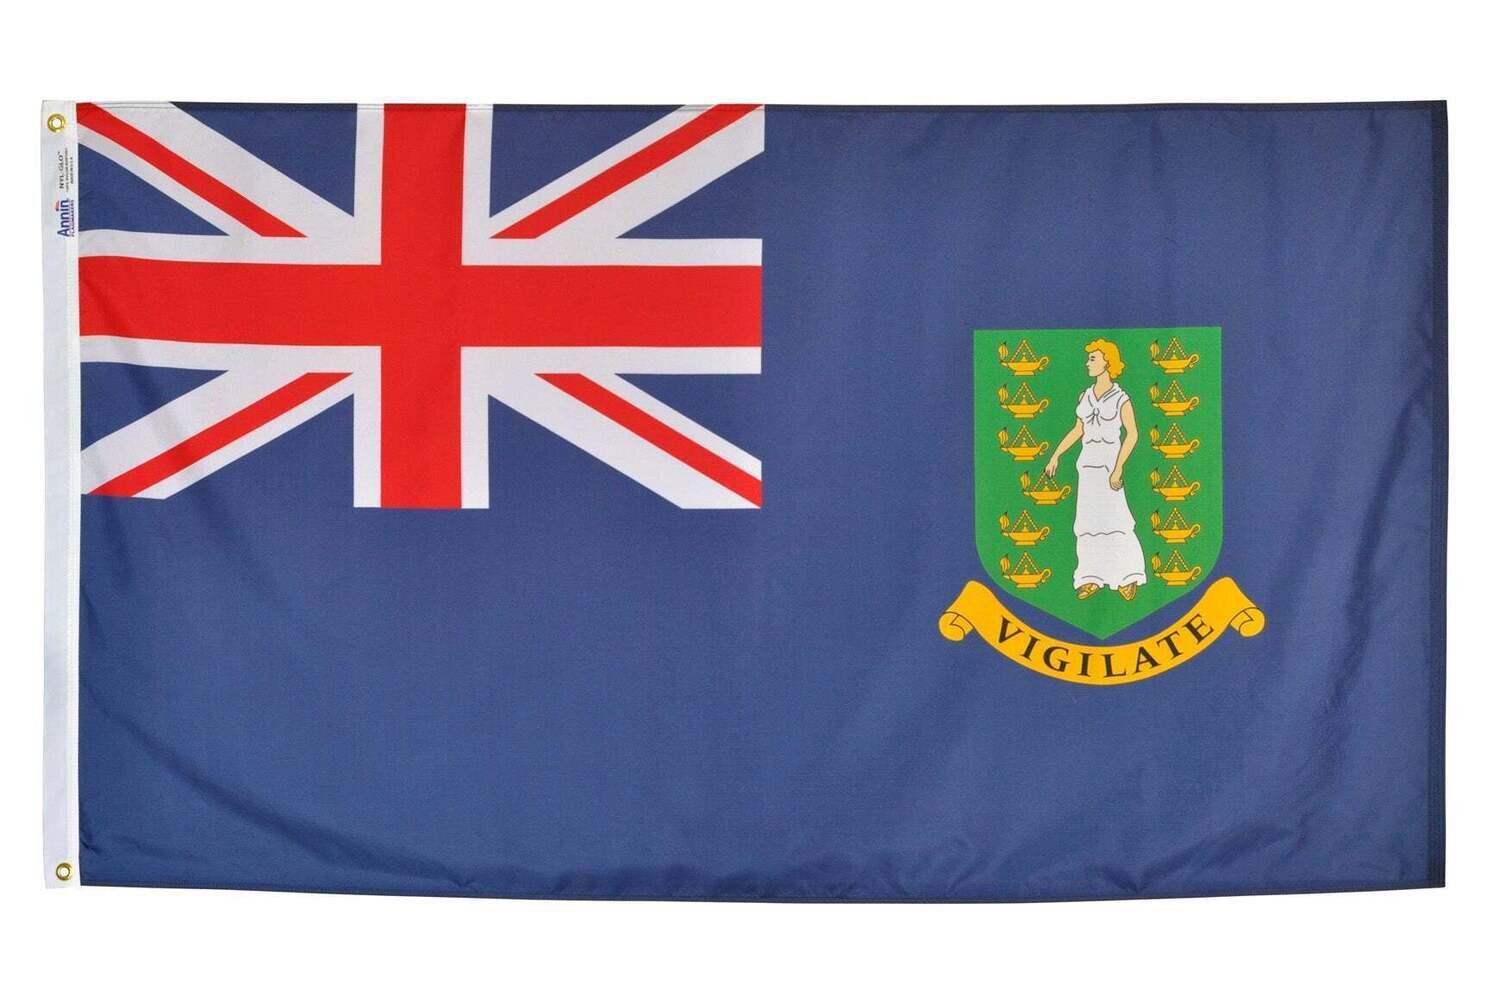 British Virgin Islands Flag, Blue 3x5 ft. Nylon SolarGuard Nyl-Glo 100% Made in USA to Official United Nations Design Specifications.